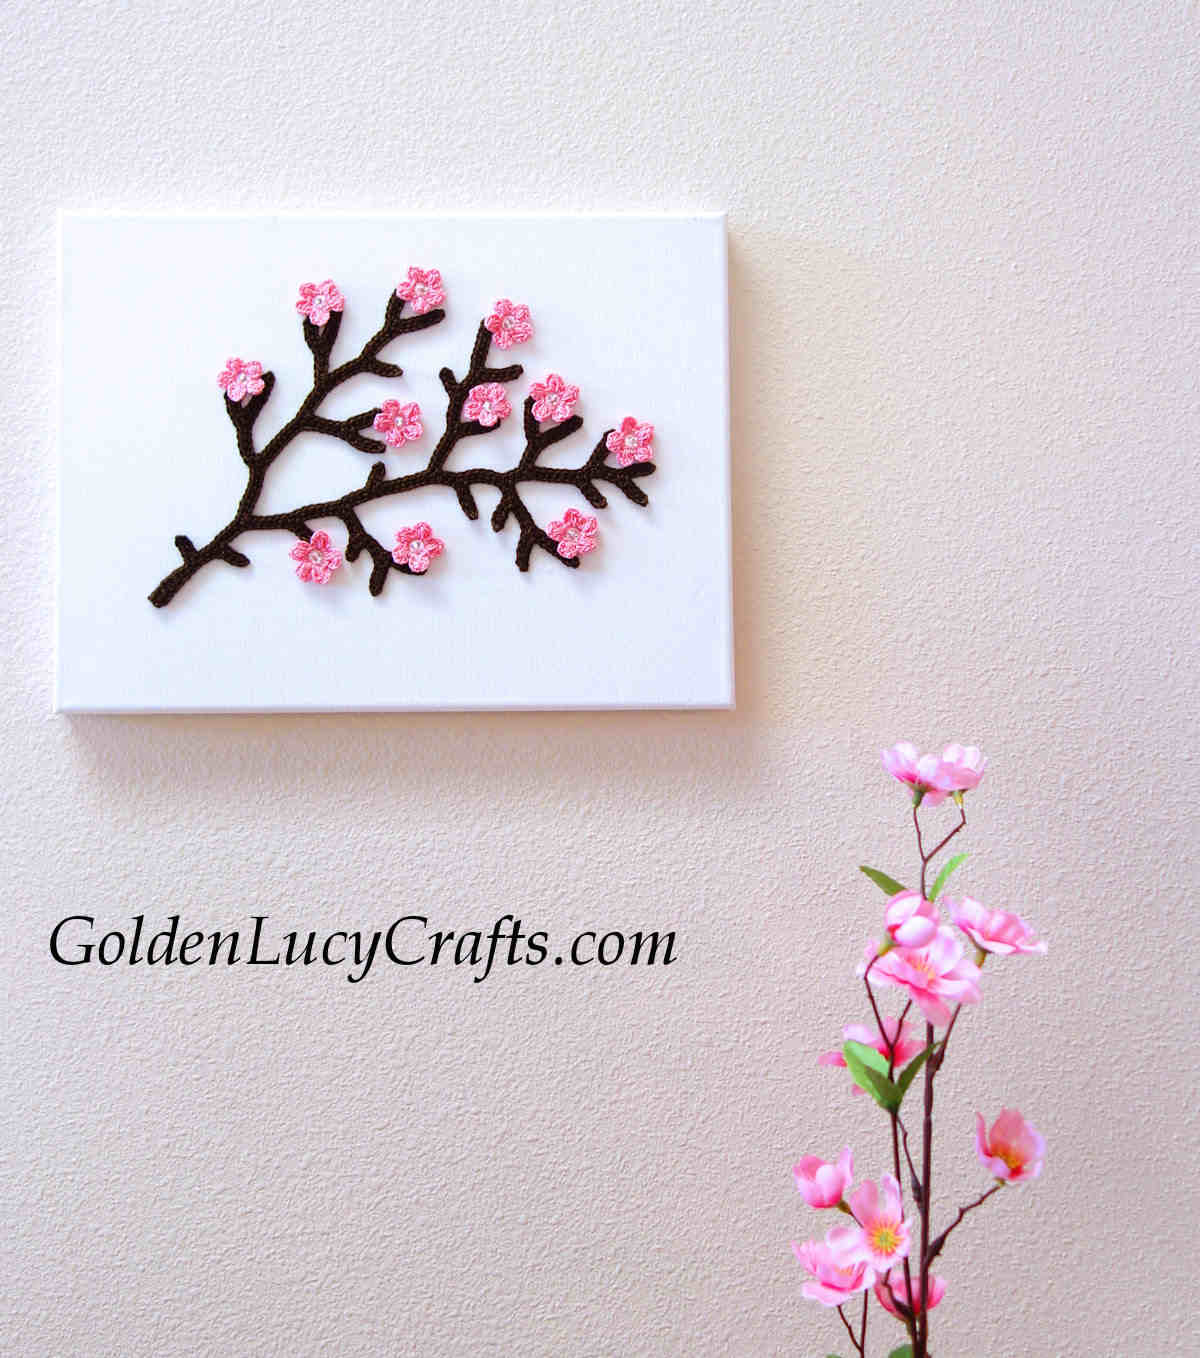 Crochet cherry tree branch on the canvas hanging on the wall.